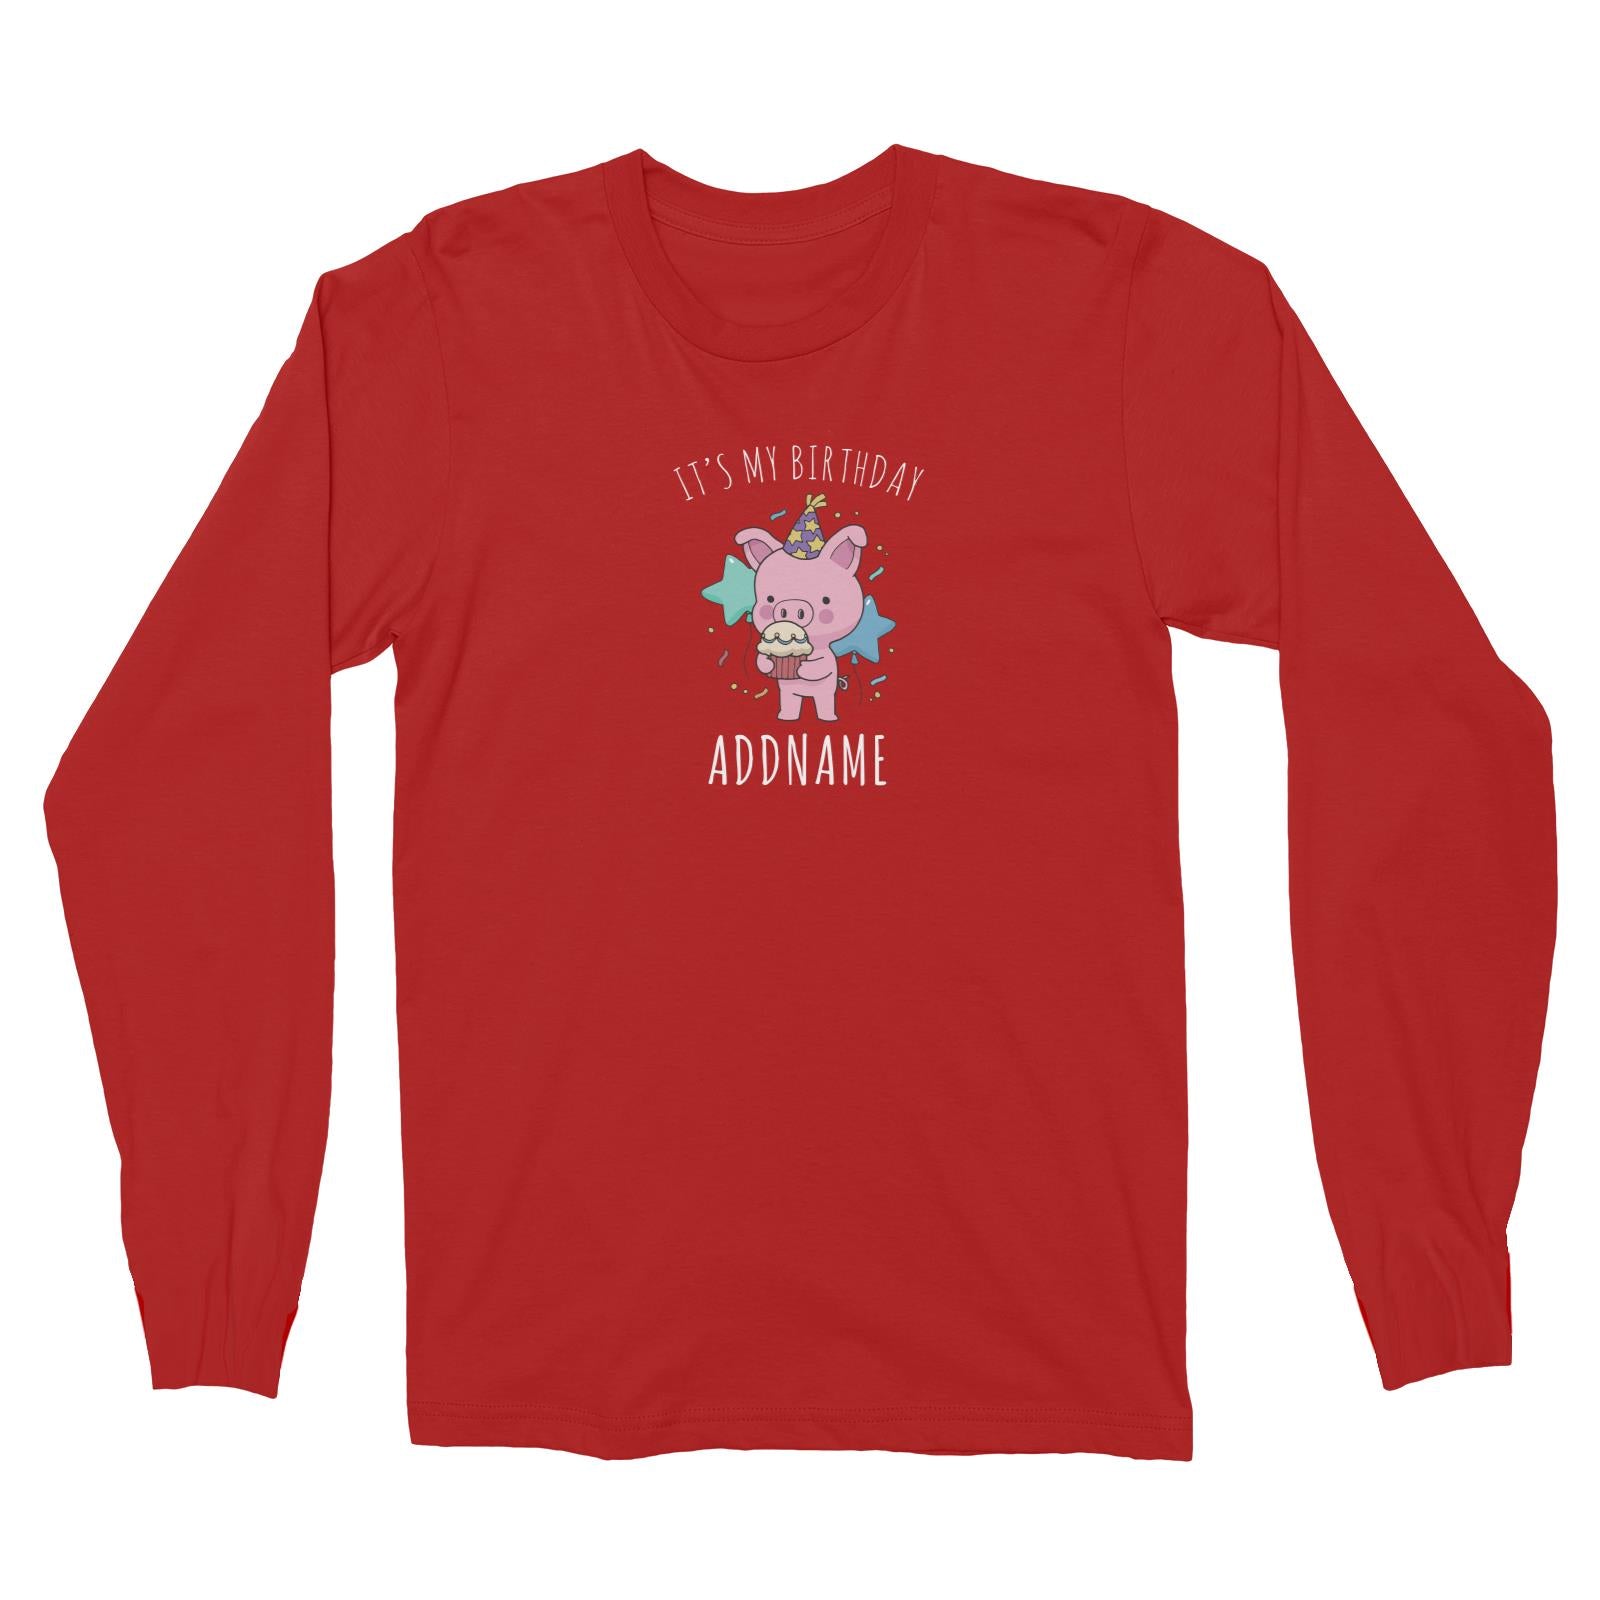 Birthday Sketch Animals Pig with Party Hat Eating Cupcake It's My Birthday Addname Long Sleeve Unisex T-Shirt